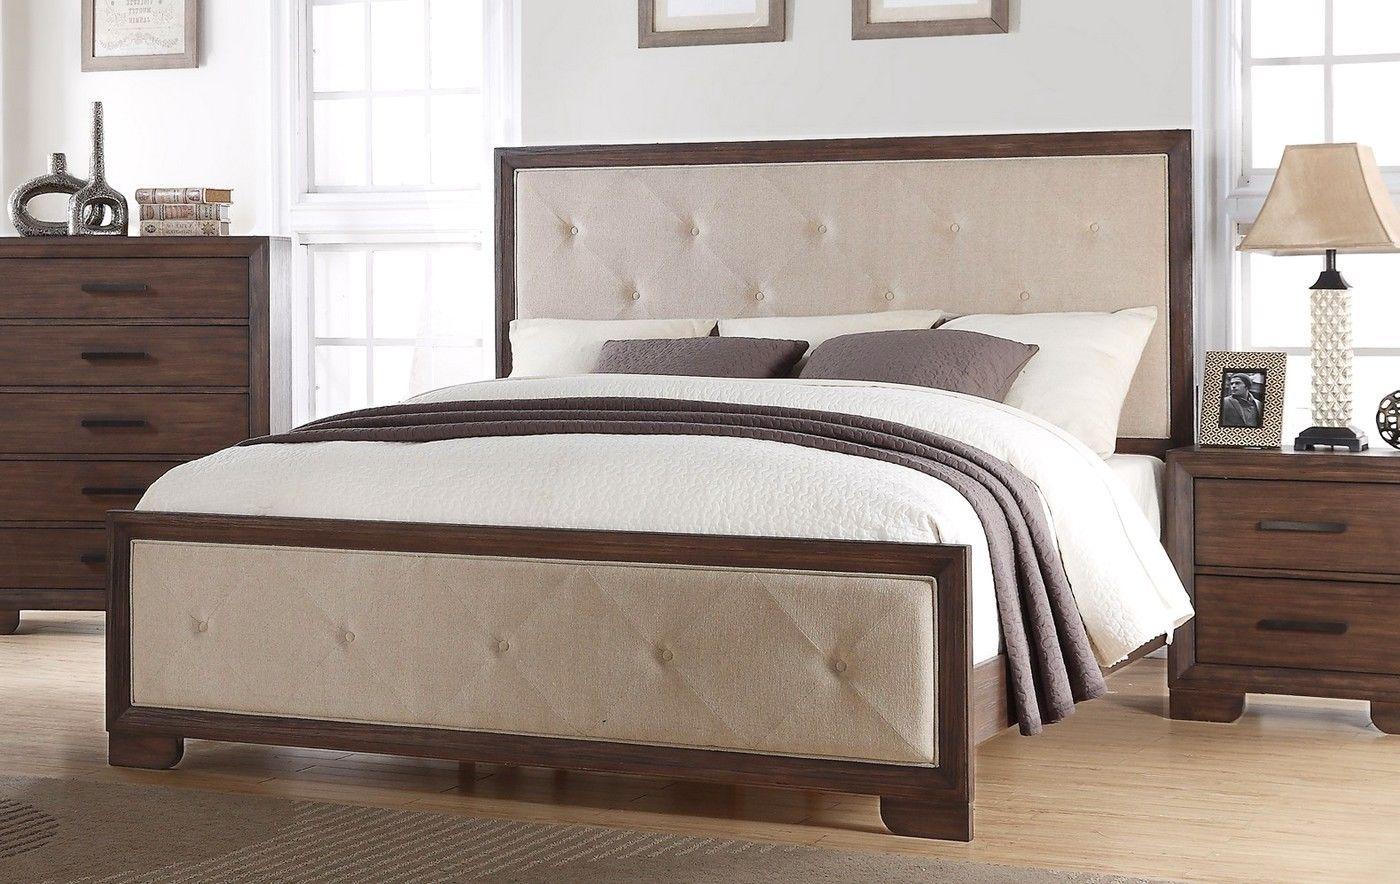 

    
McFerran B510-Q Wood Finish Diamond Patterned Upholstered Queen Bed
